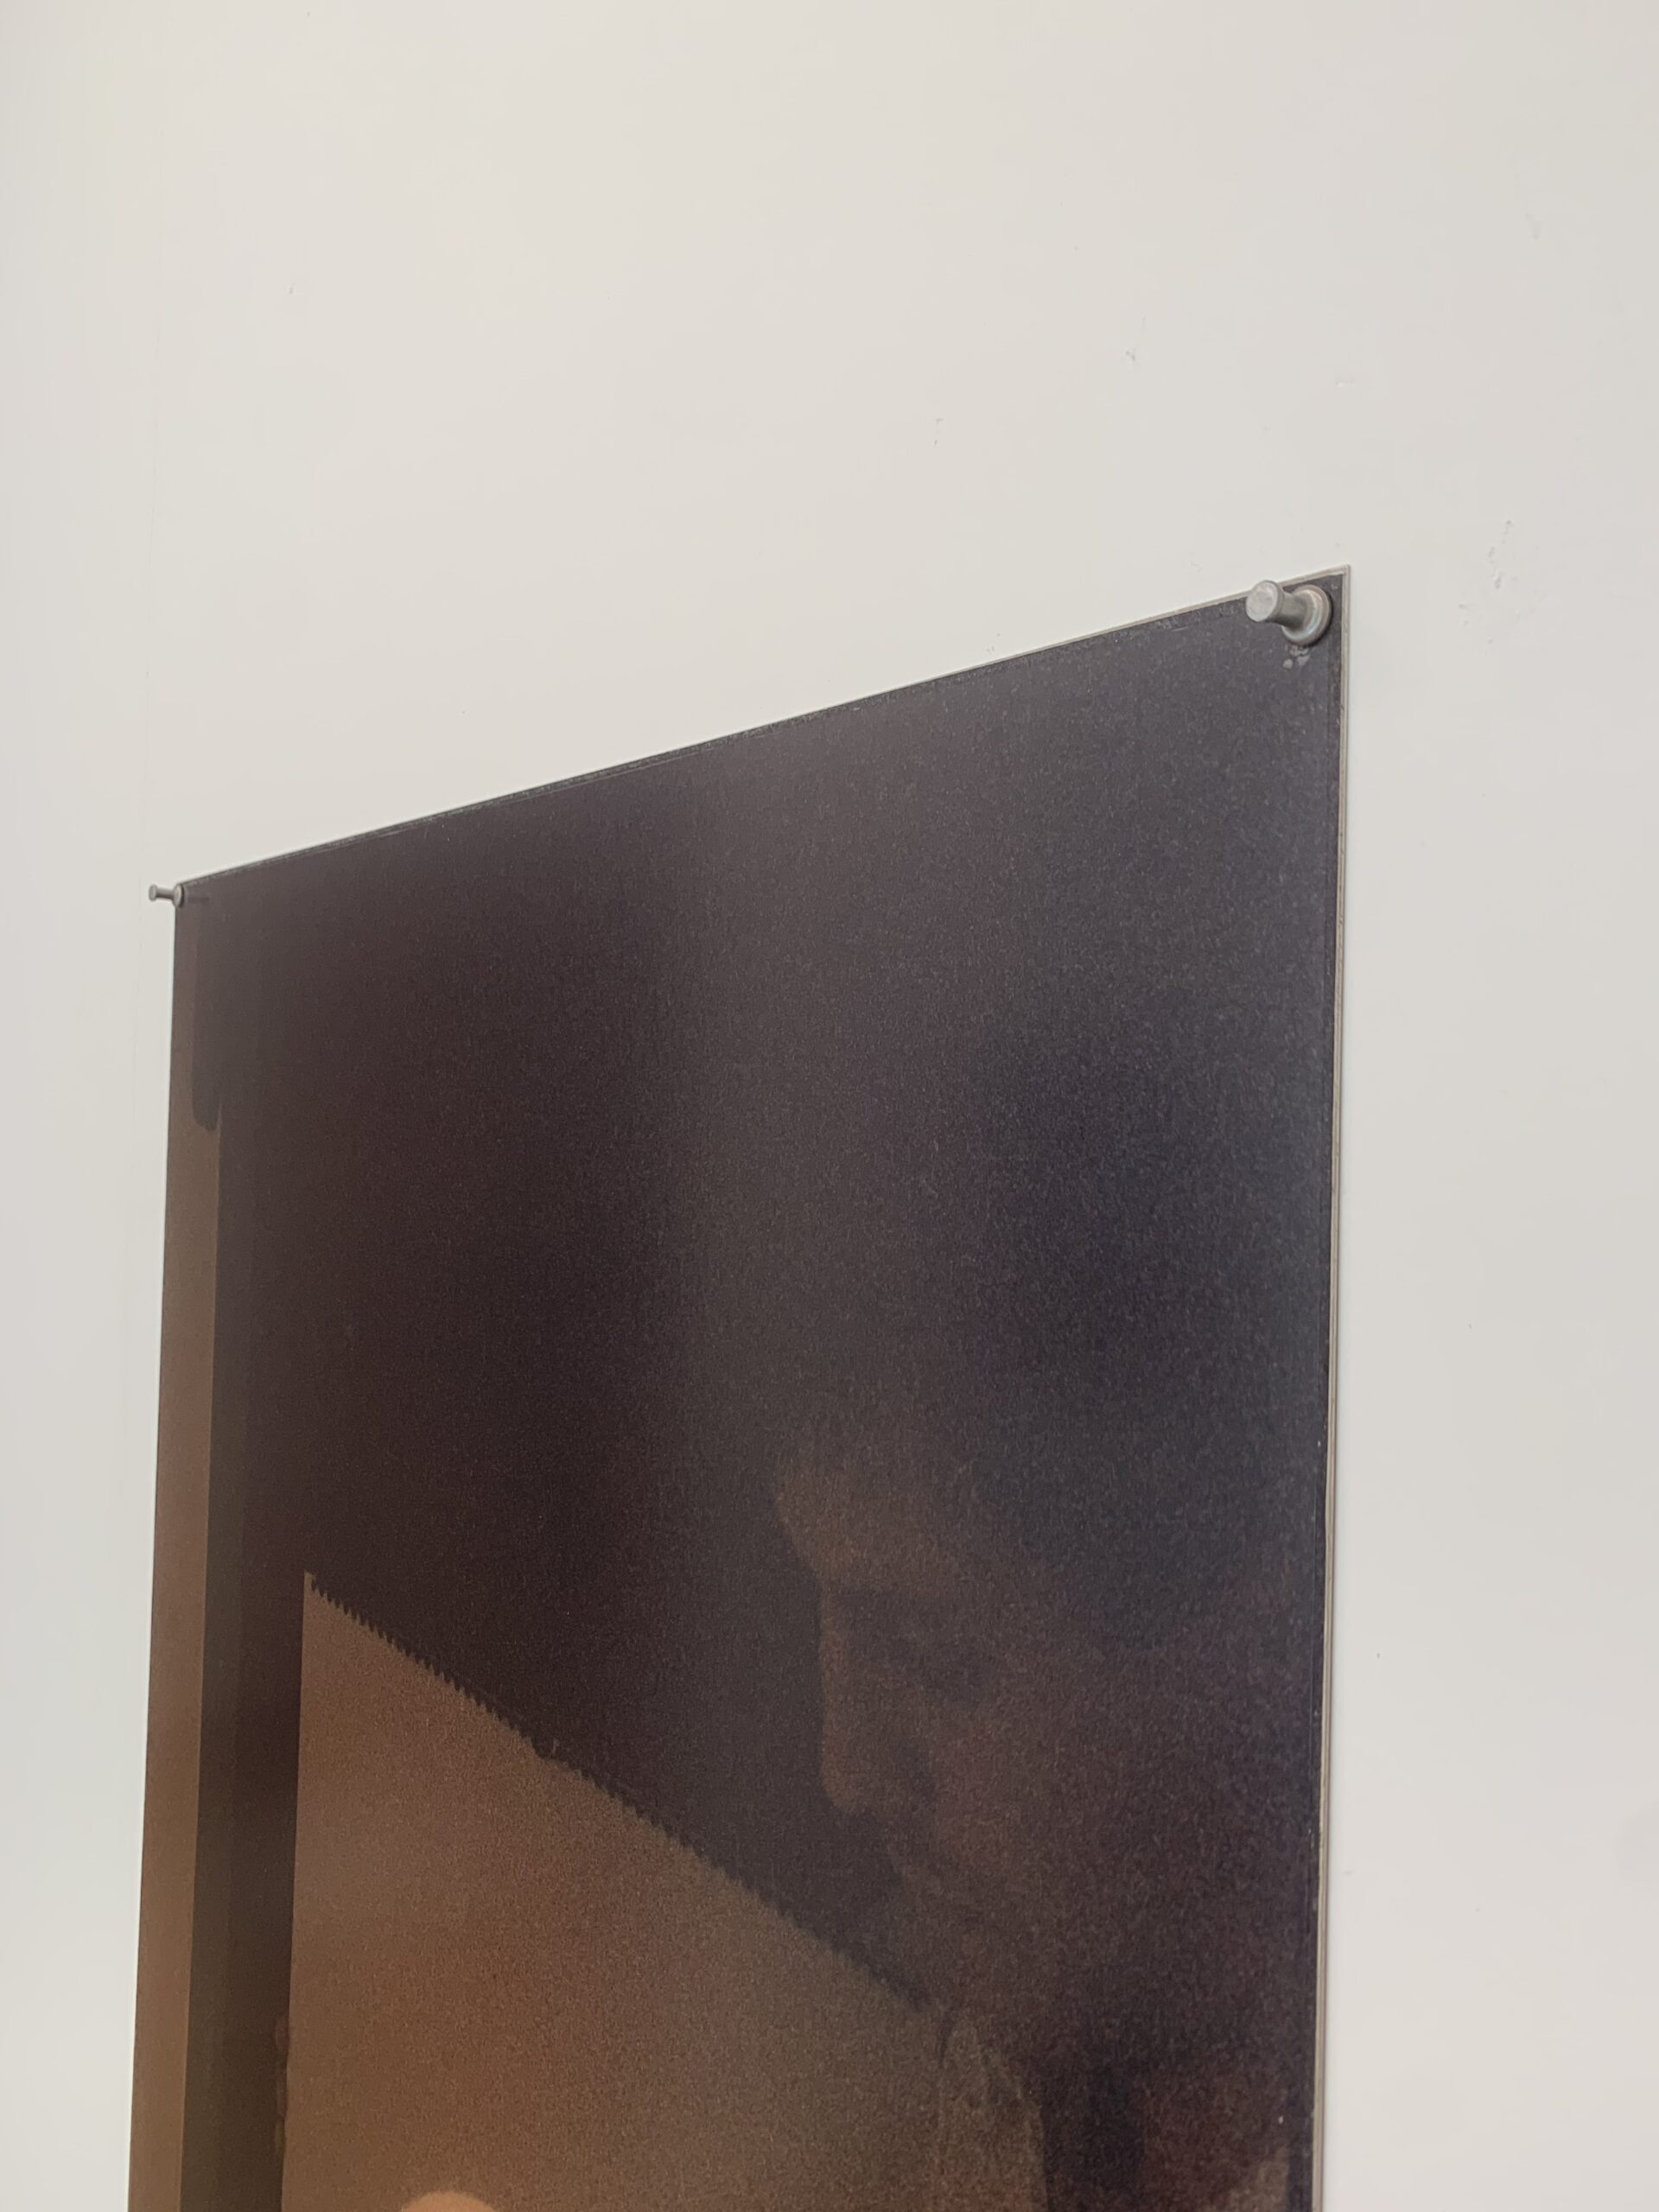 Wido Blokland, Telescopic projection of solar light image on a sheet of paper held up by the artist – 1996